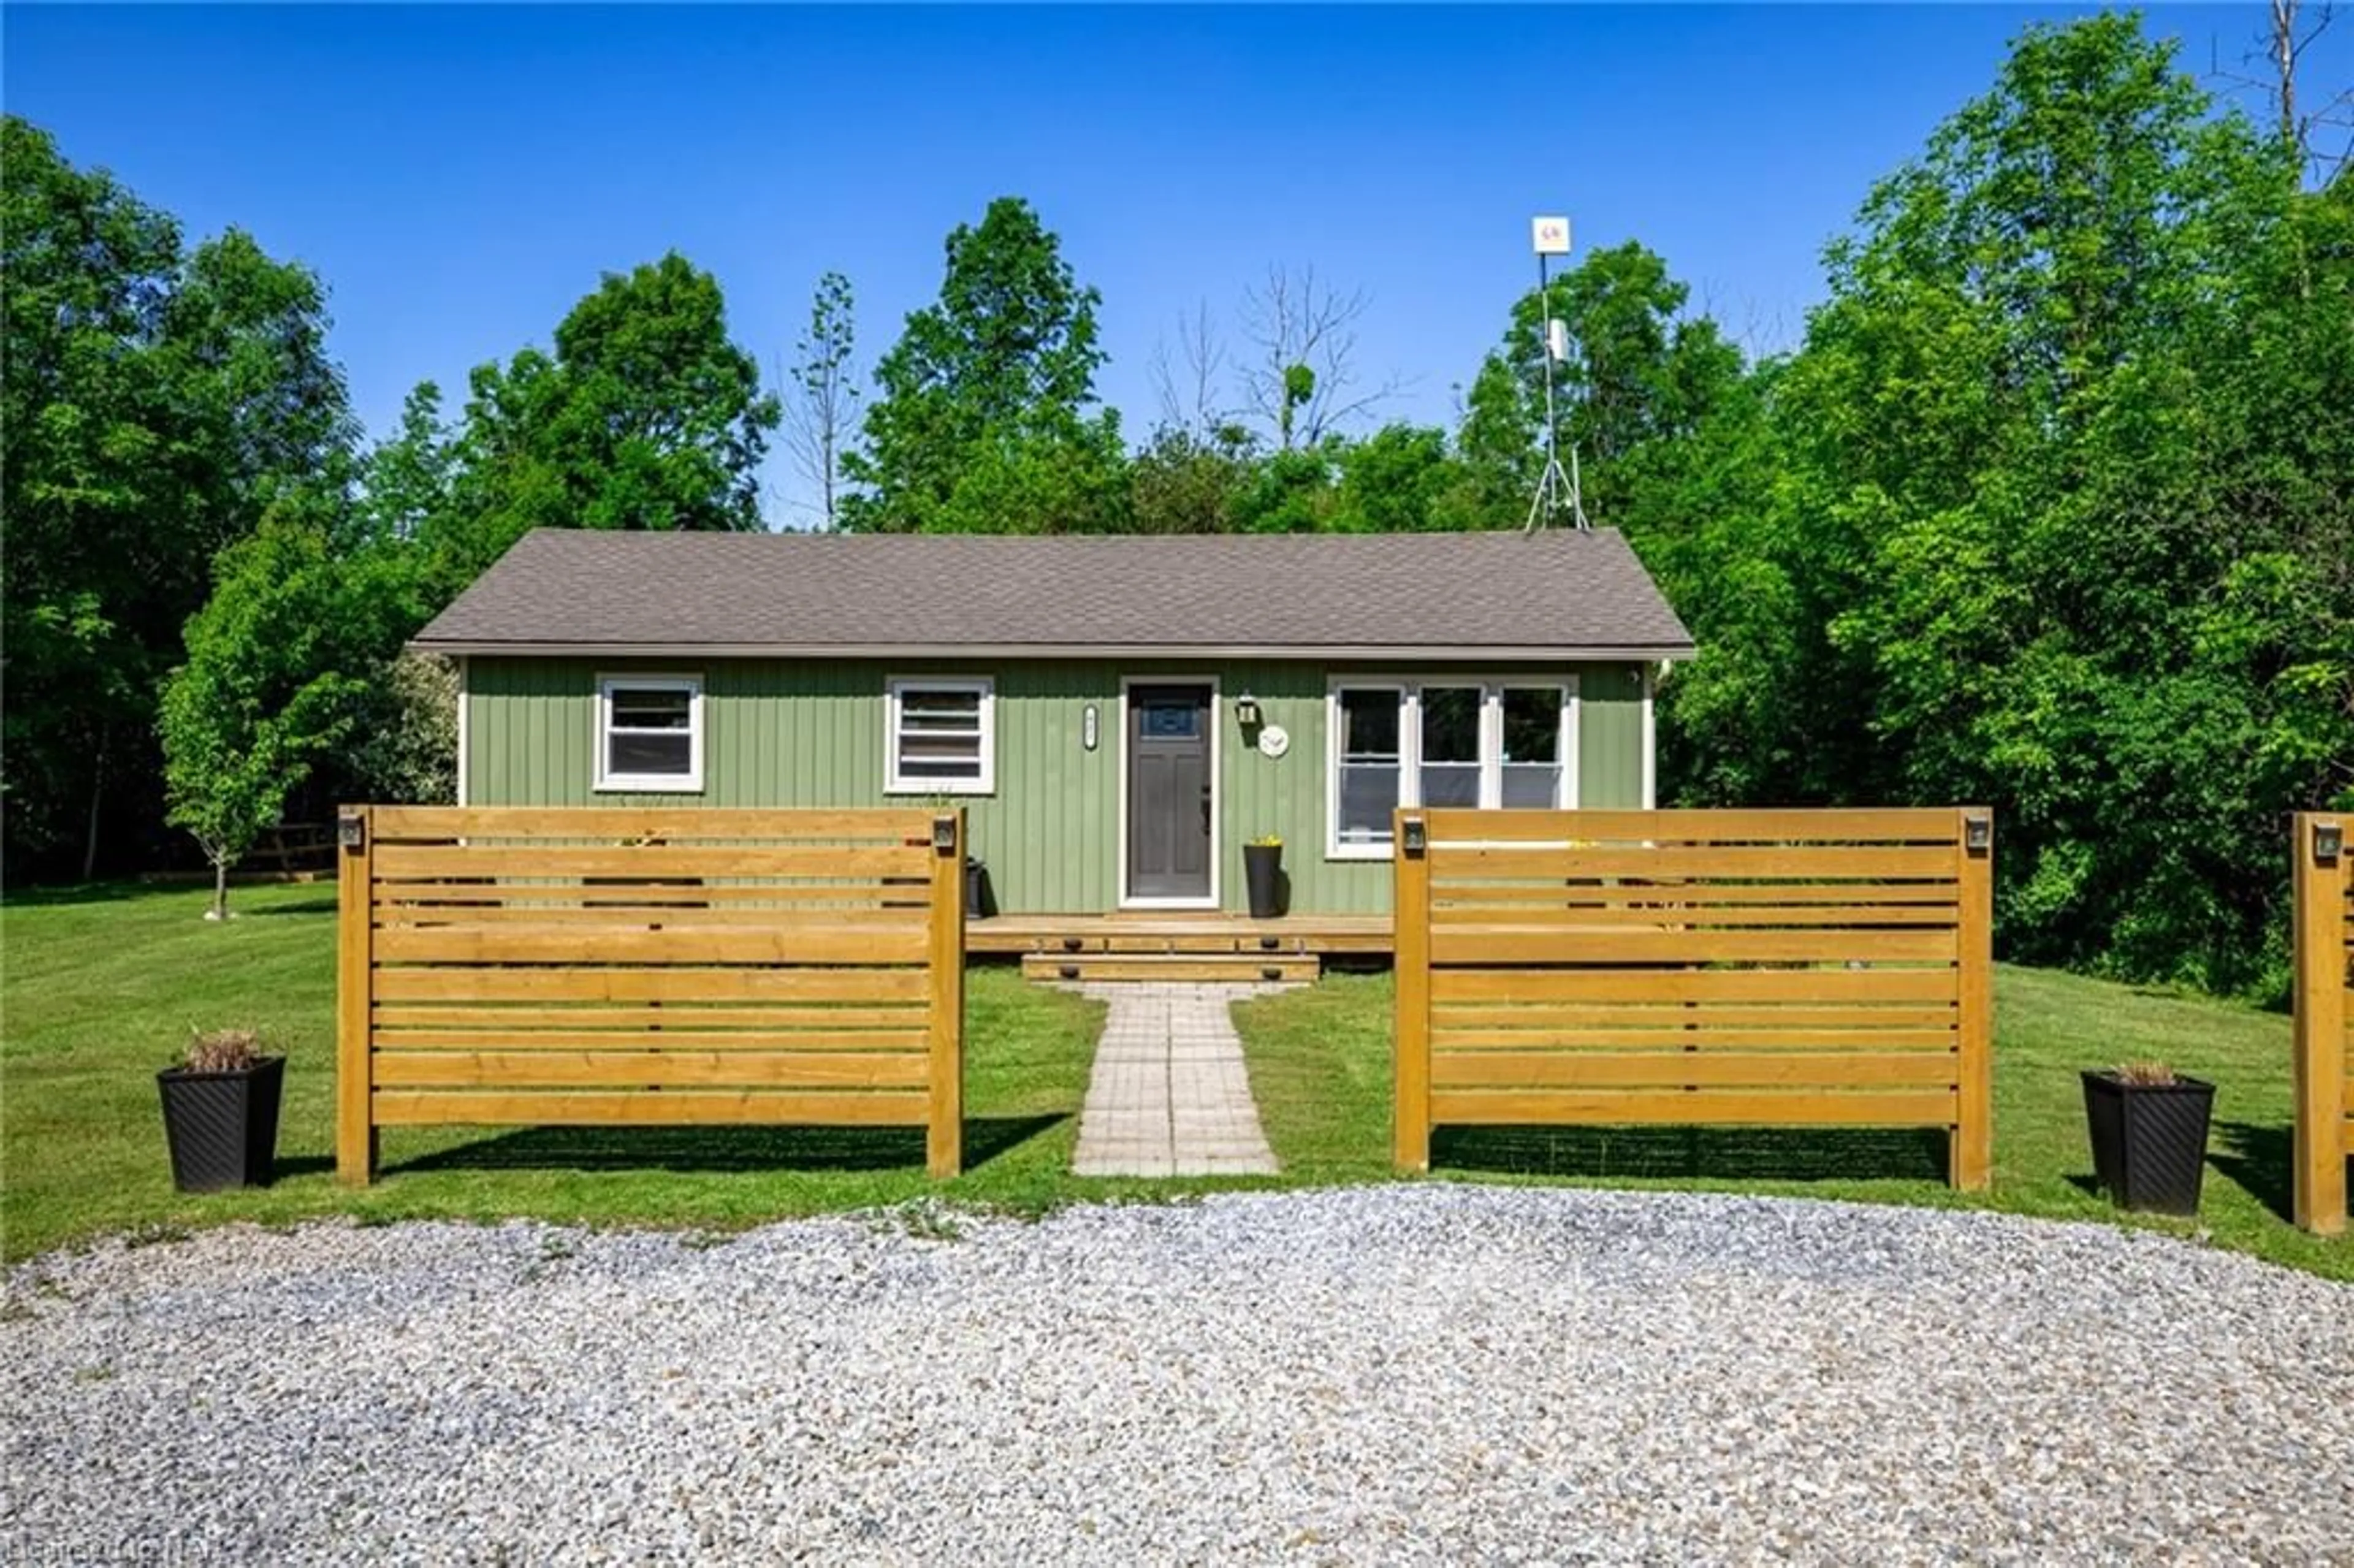 Fenced yard for 621 Bidwell Pky, Fort Erie Ontario L2A 5M4